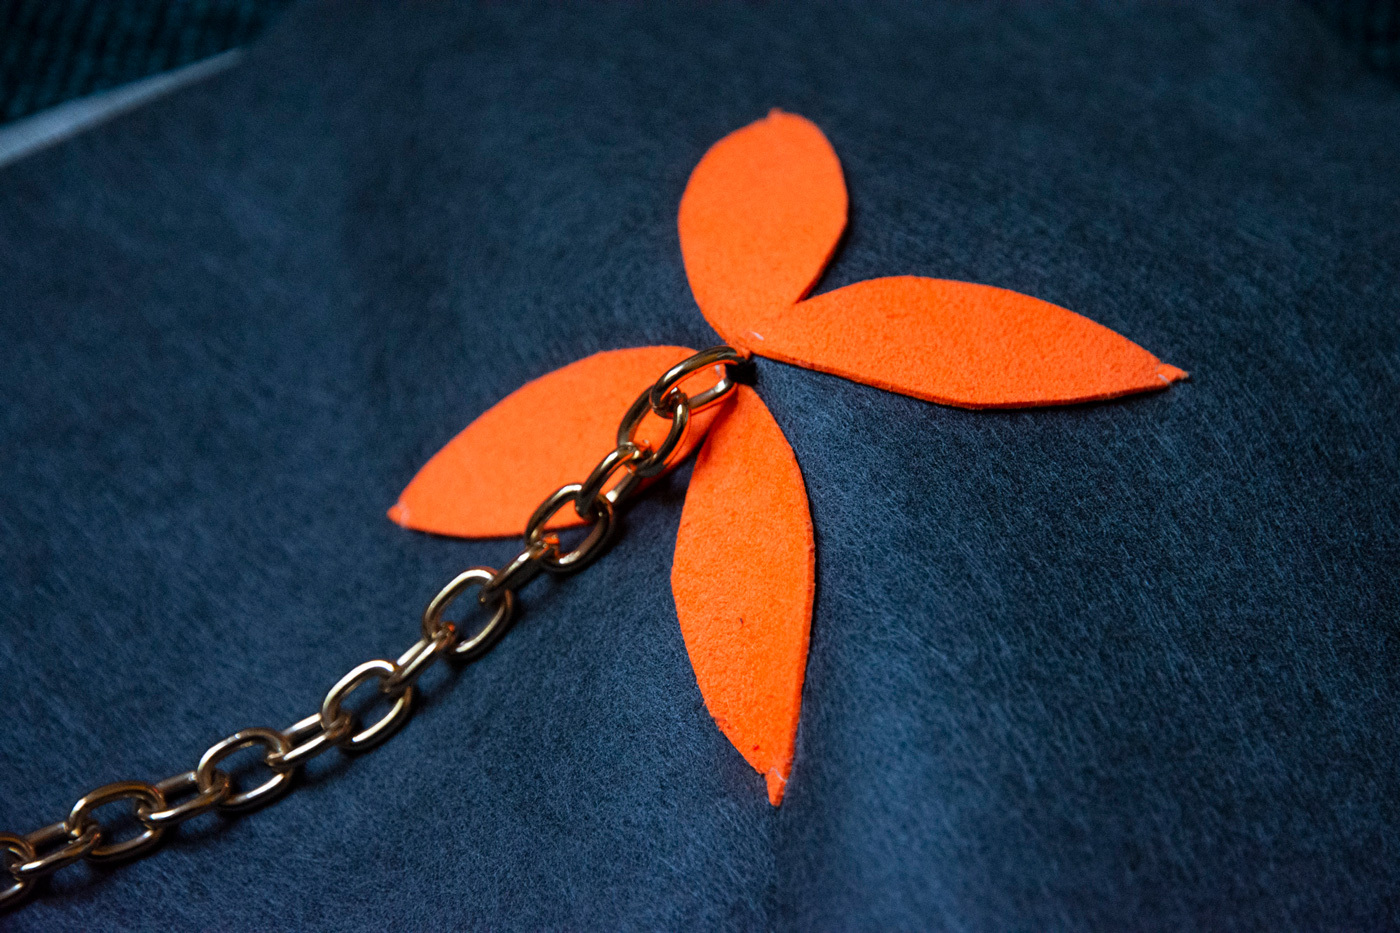 A flower-shaped neon orange motif is sewn on top of a matted grey fabric. From the center of the motif, a long gold chain is attached.